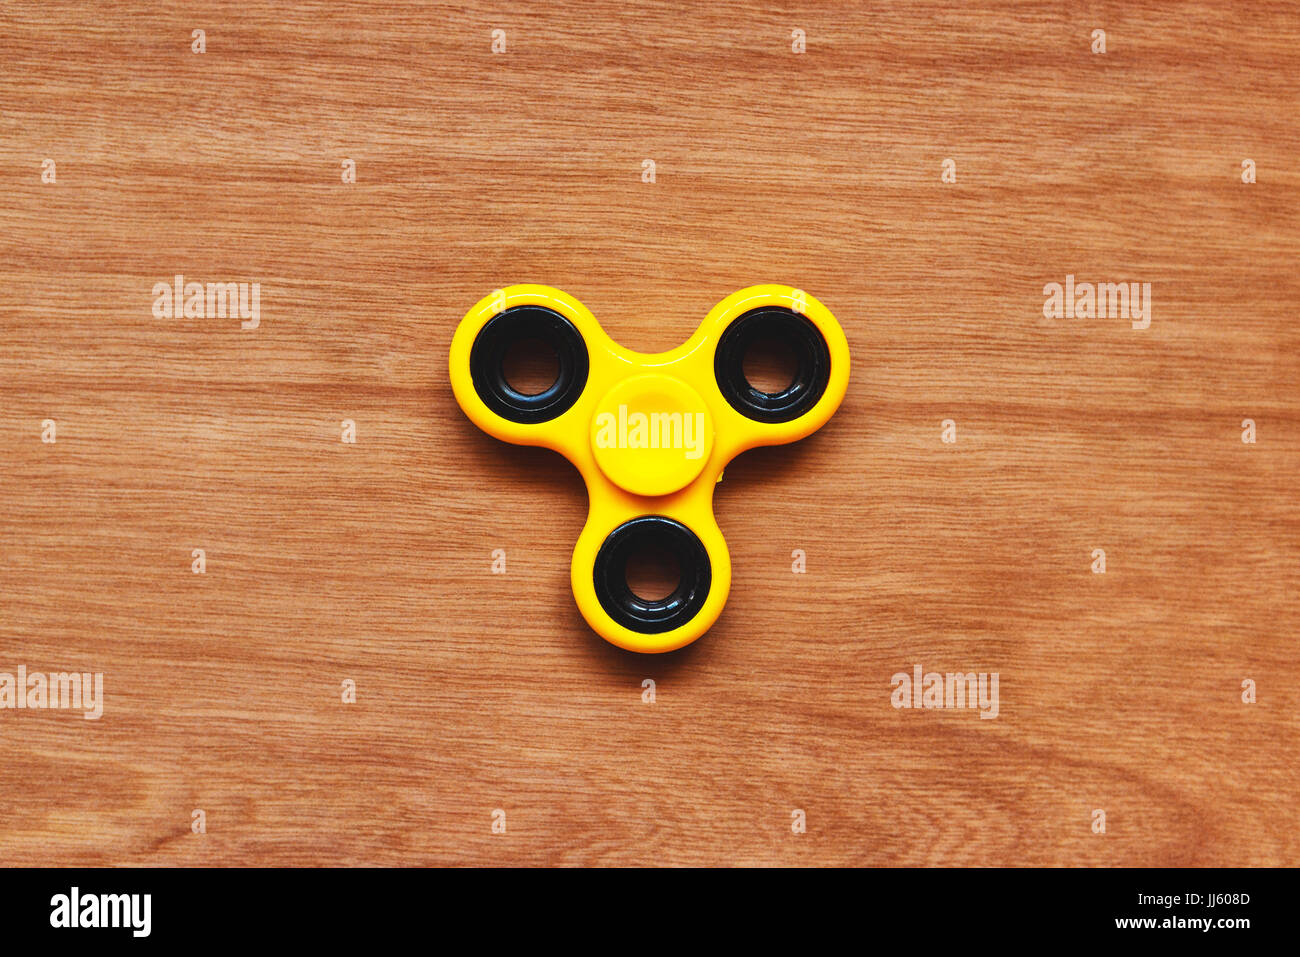 Fidget spinner toy on plywood table surface Stock Photo